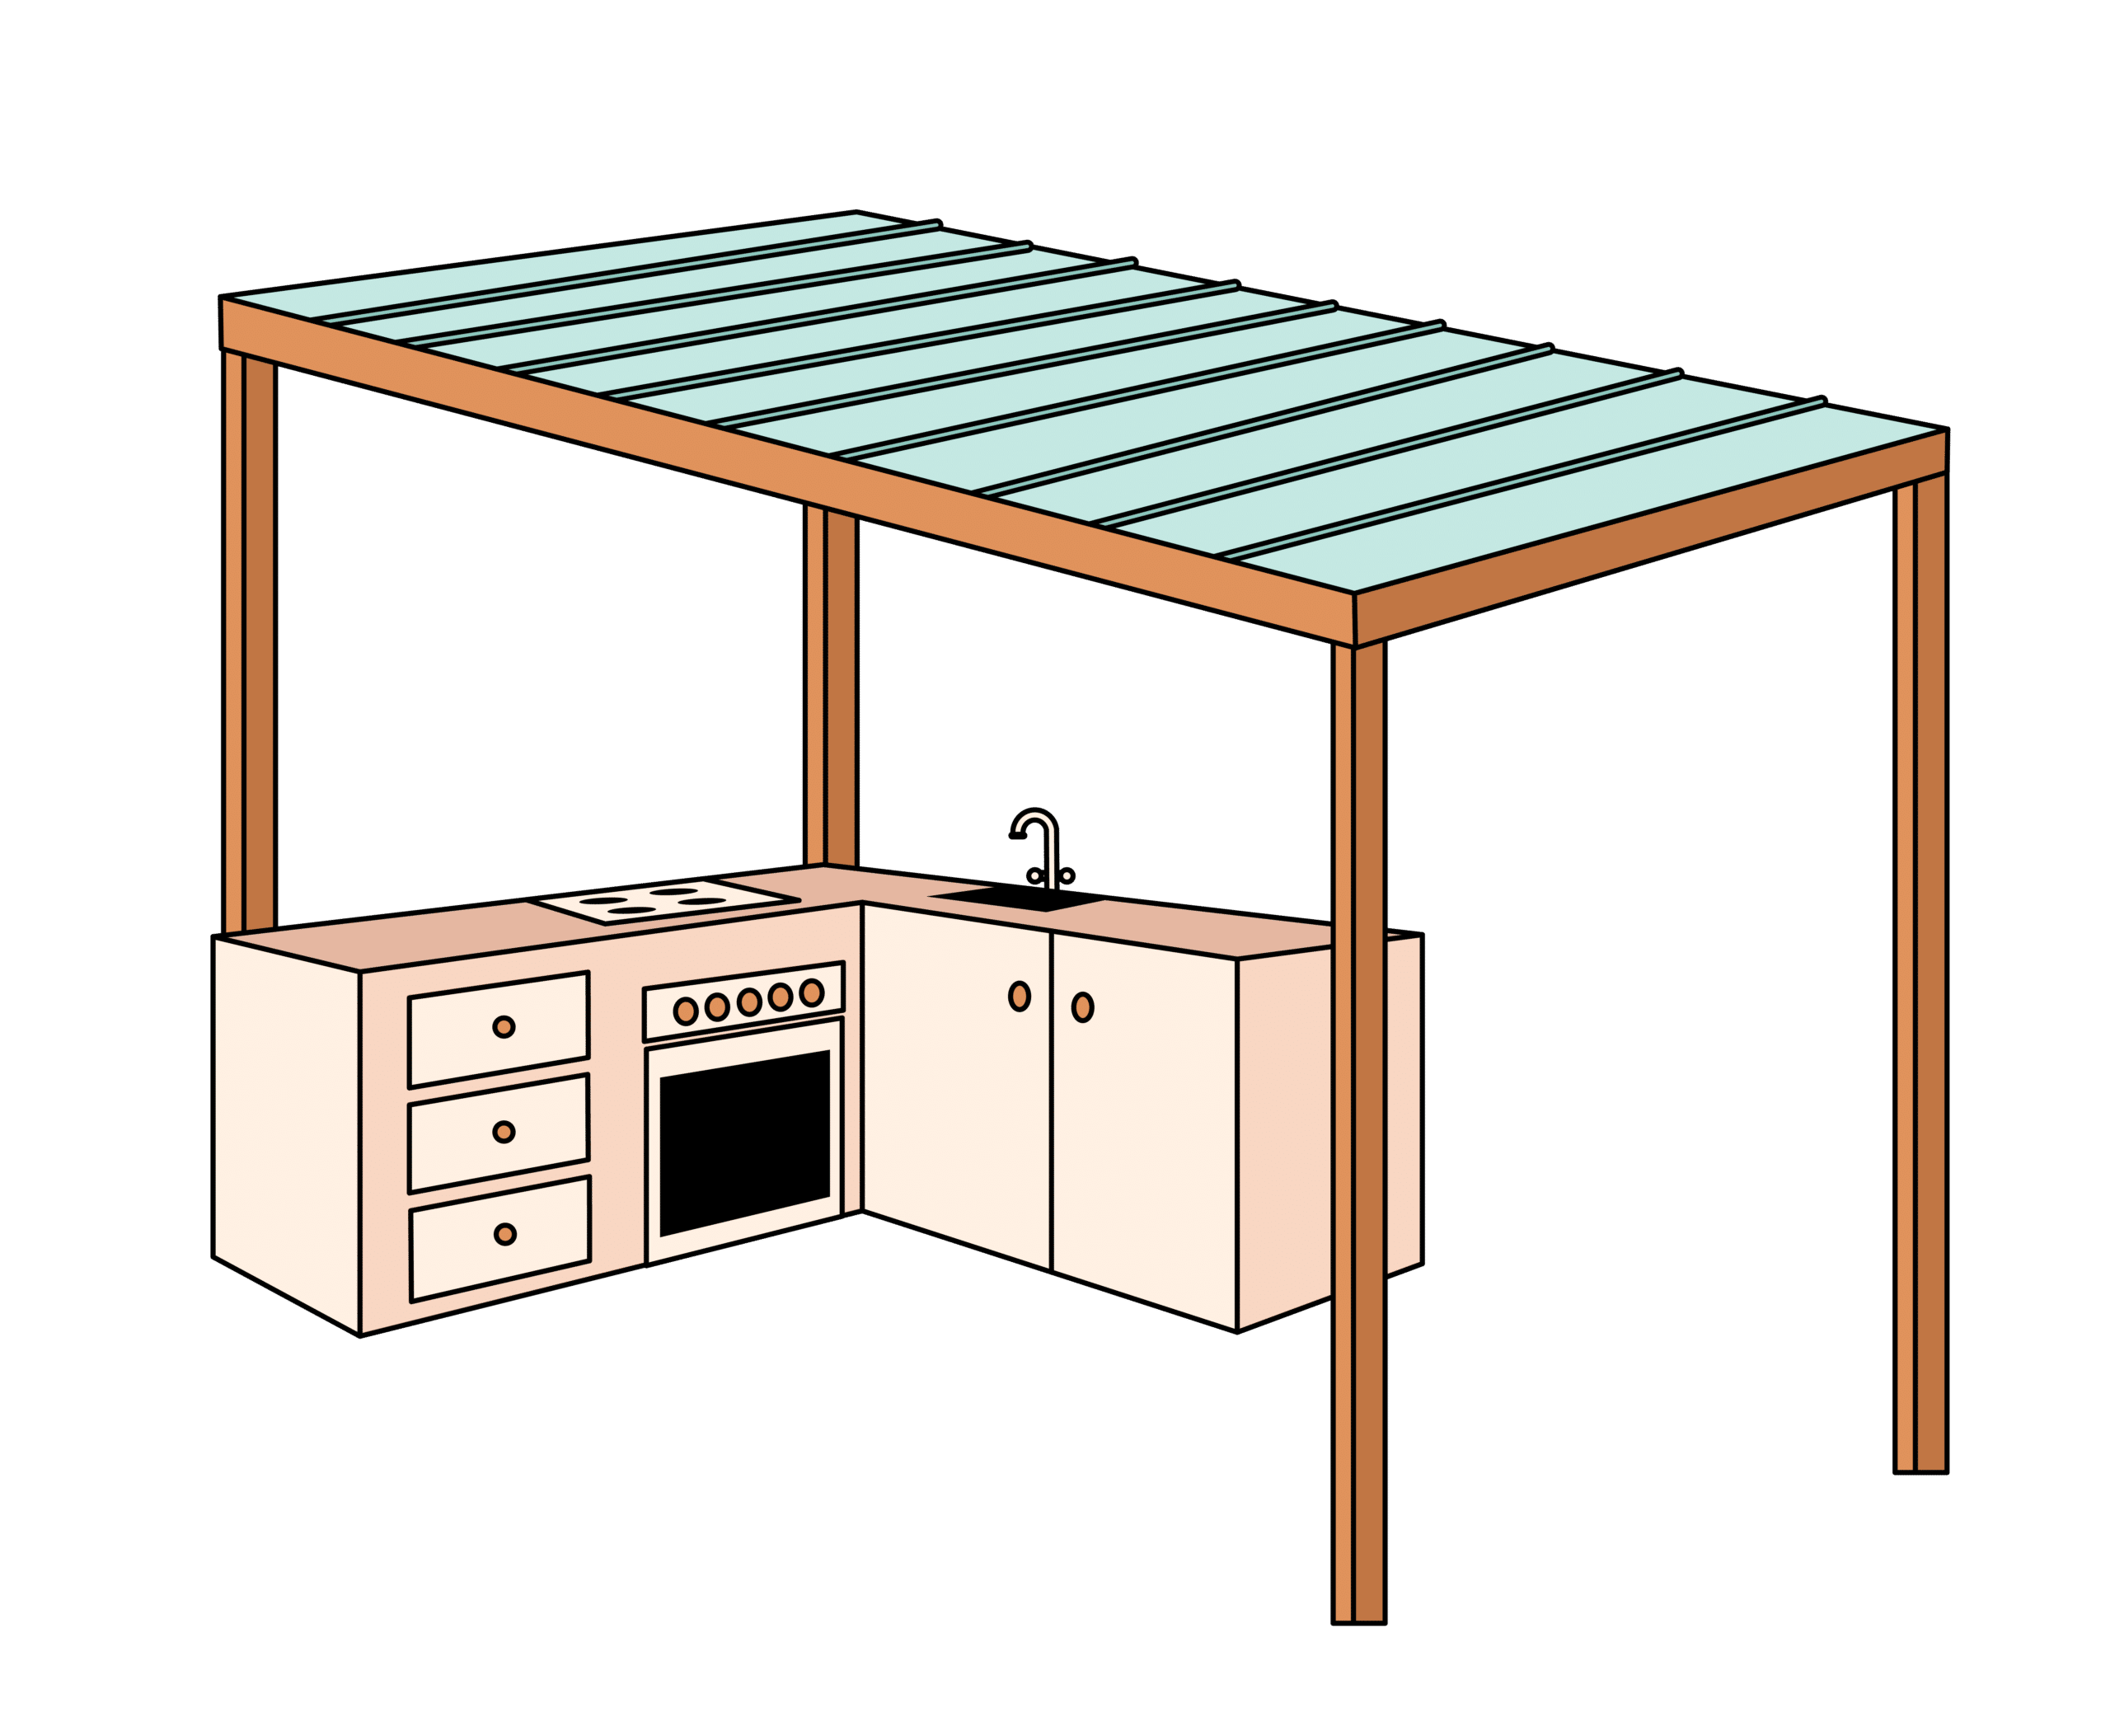 Aluminum roof for outdoor kitchen